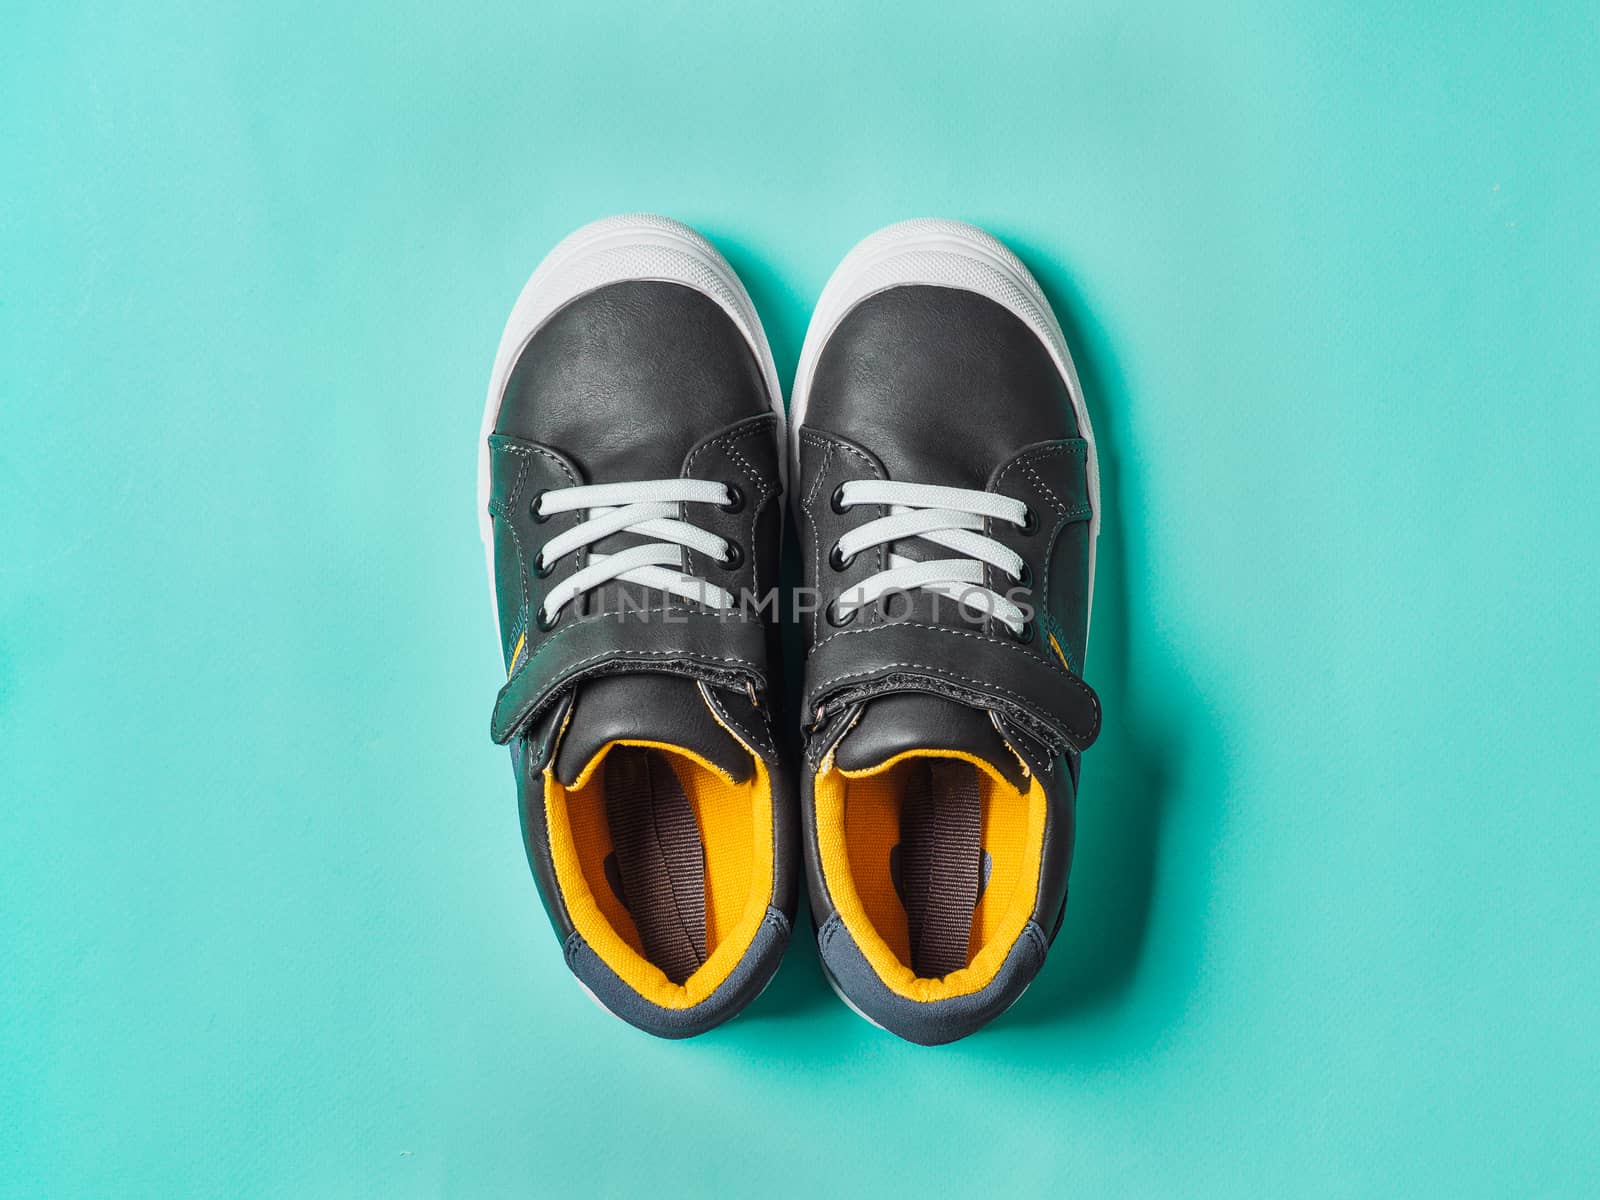 pair of new kids or adult sneakers on blue background, top view. Flat lay gray and yellow or mustard color sneakers shoes on colorful bright blue background with copy space for text or design